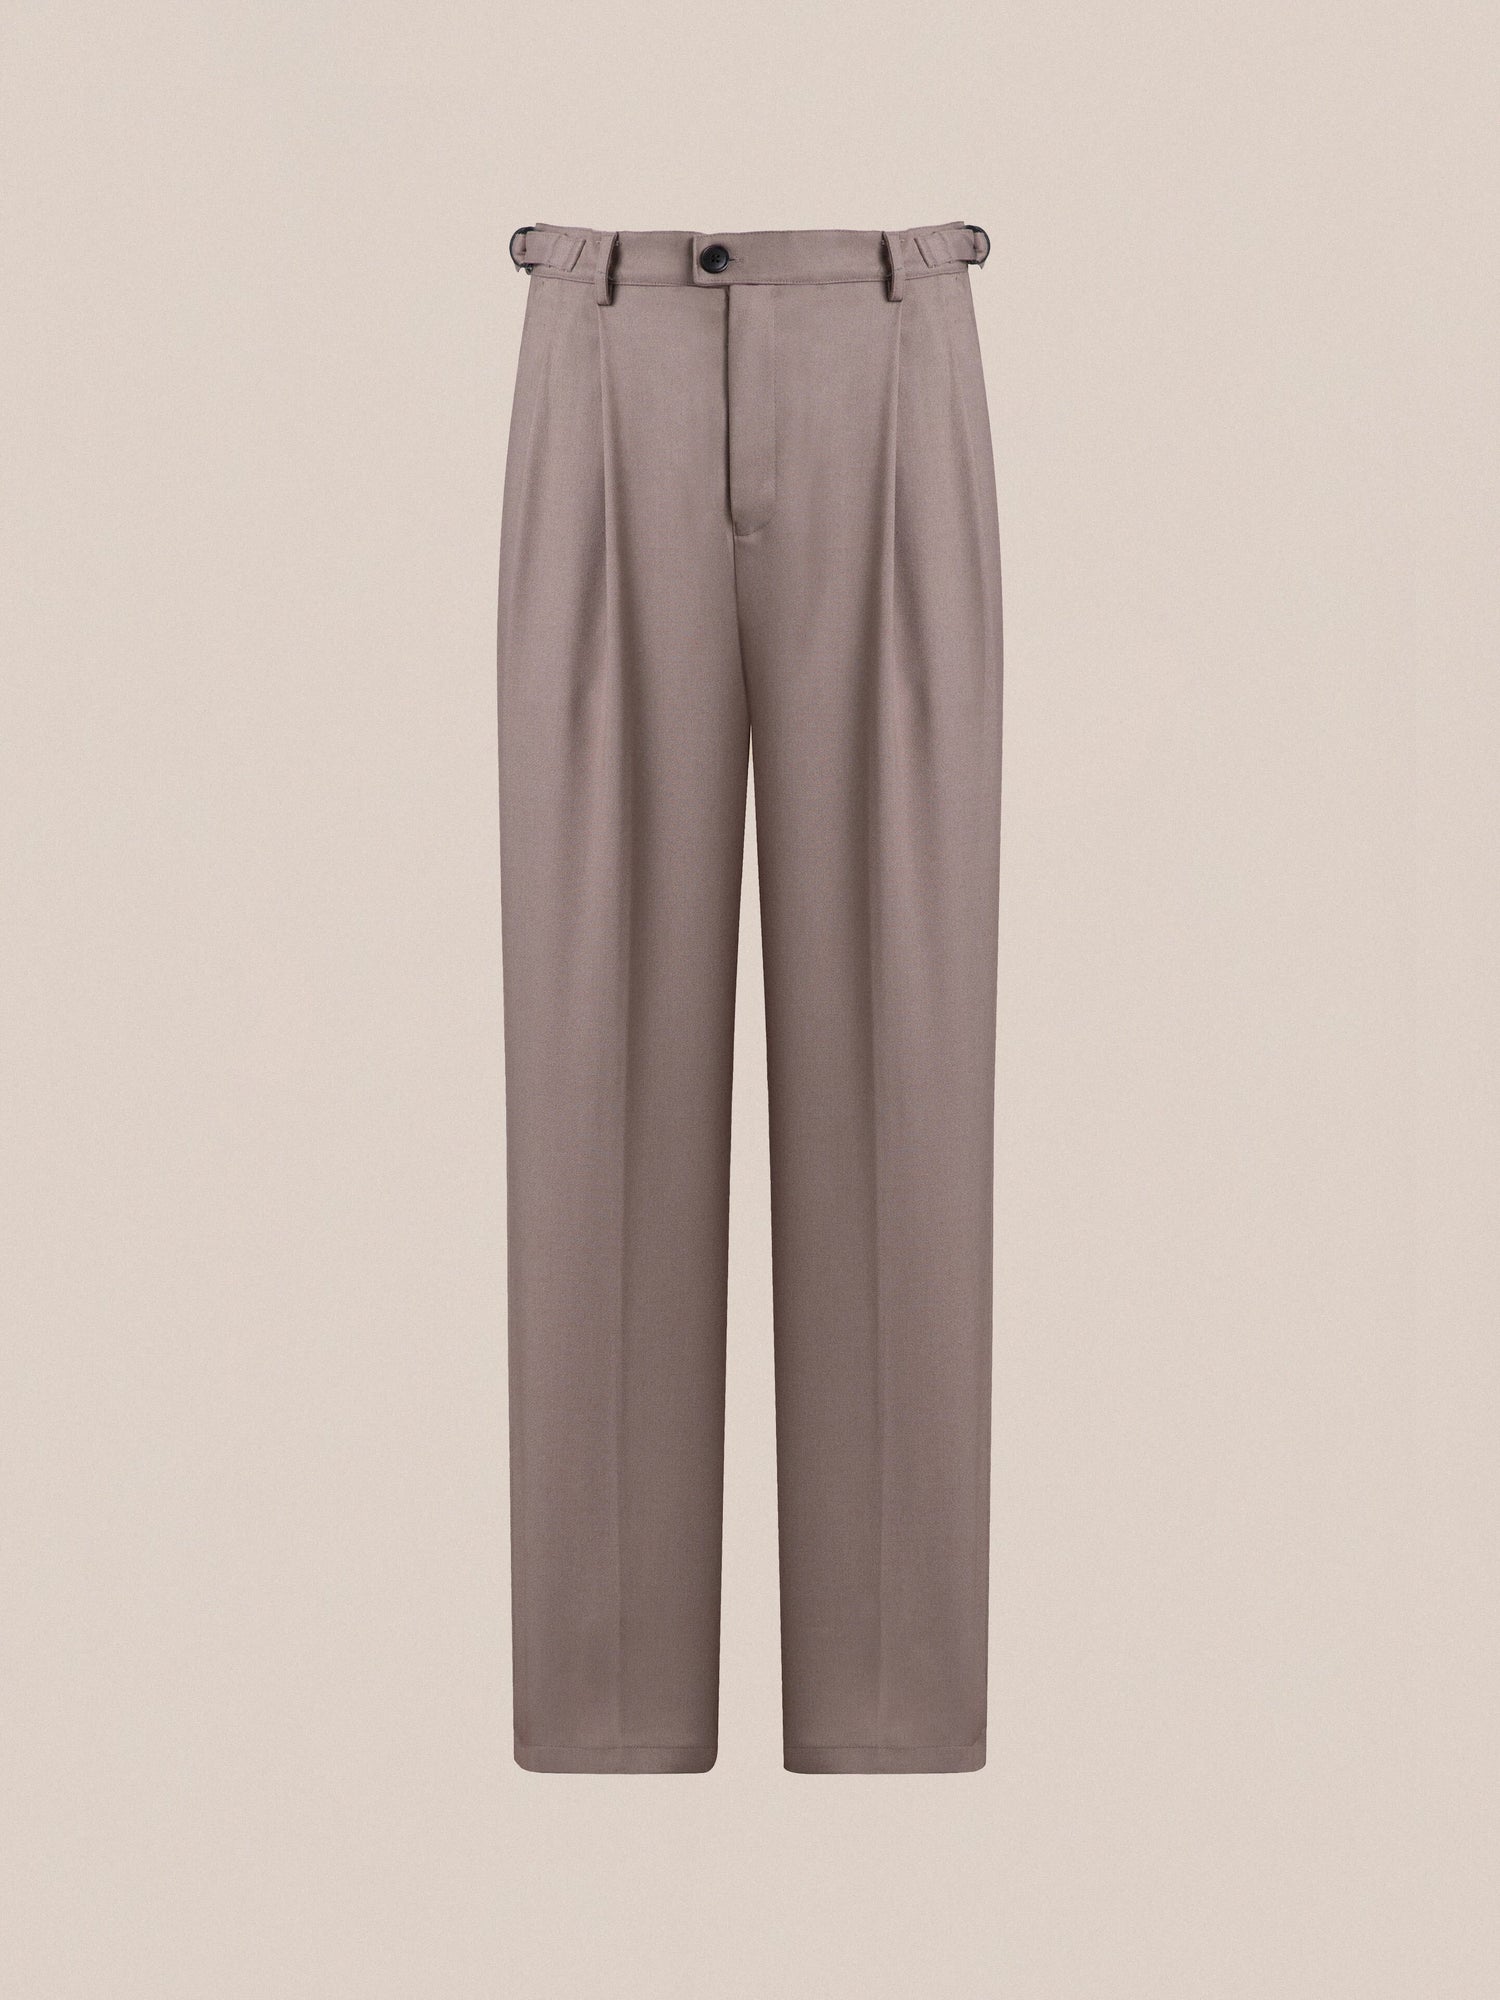 A pair of Found wide-leg taupe pleated trousers on a neutral background.